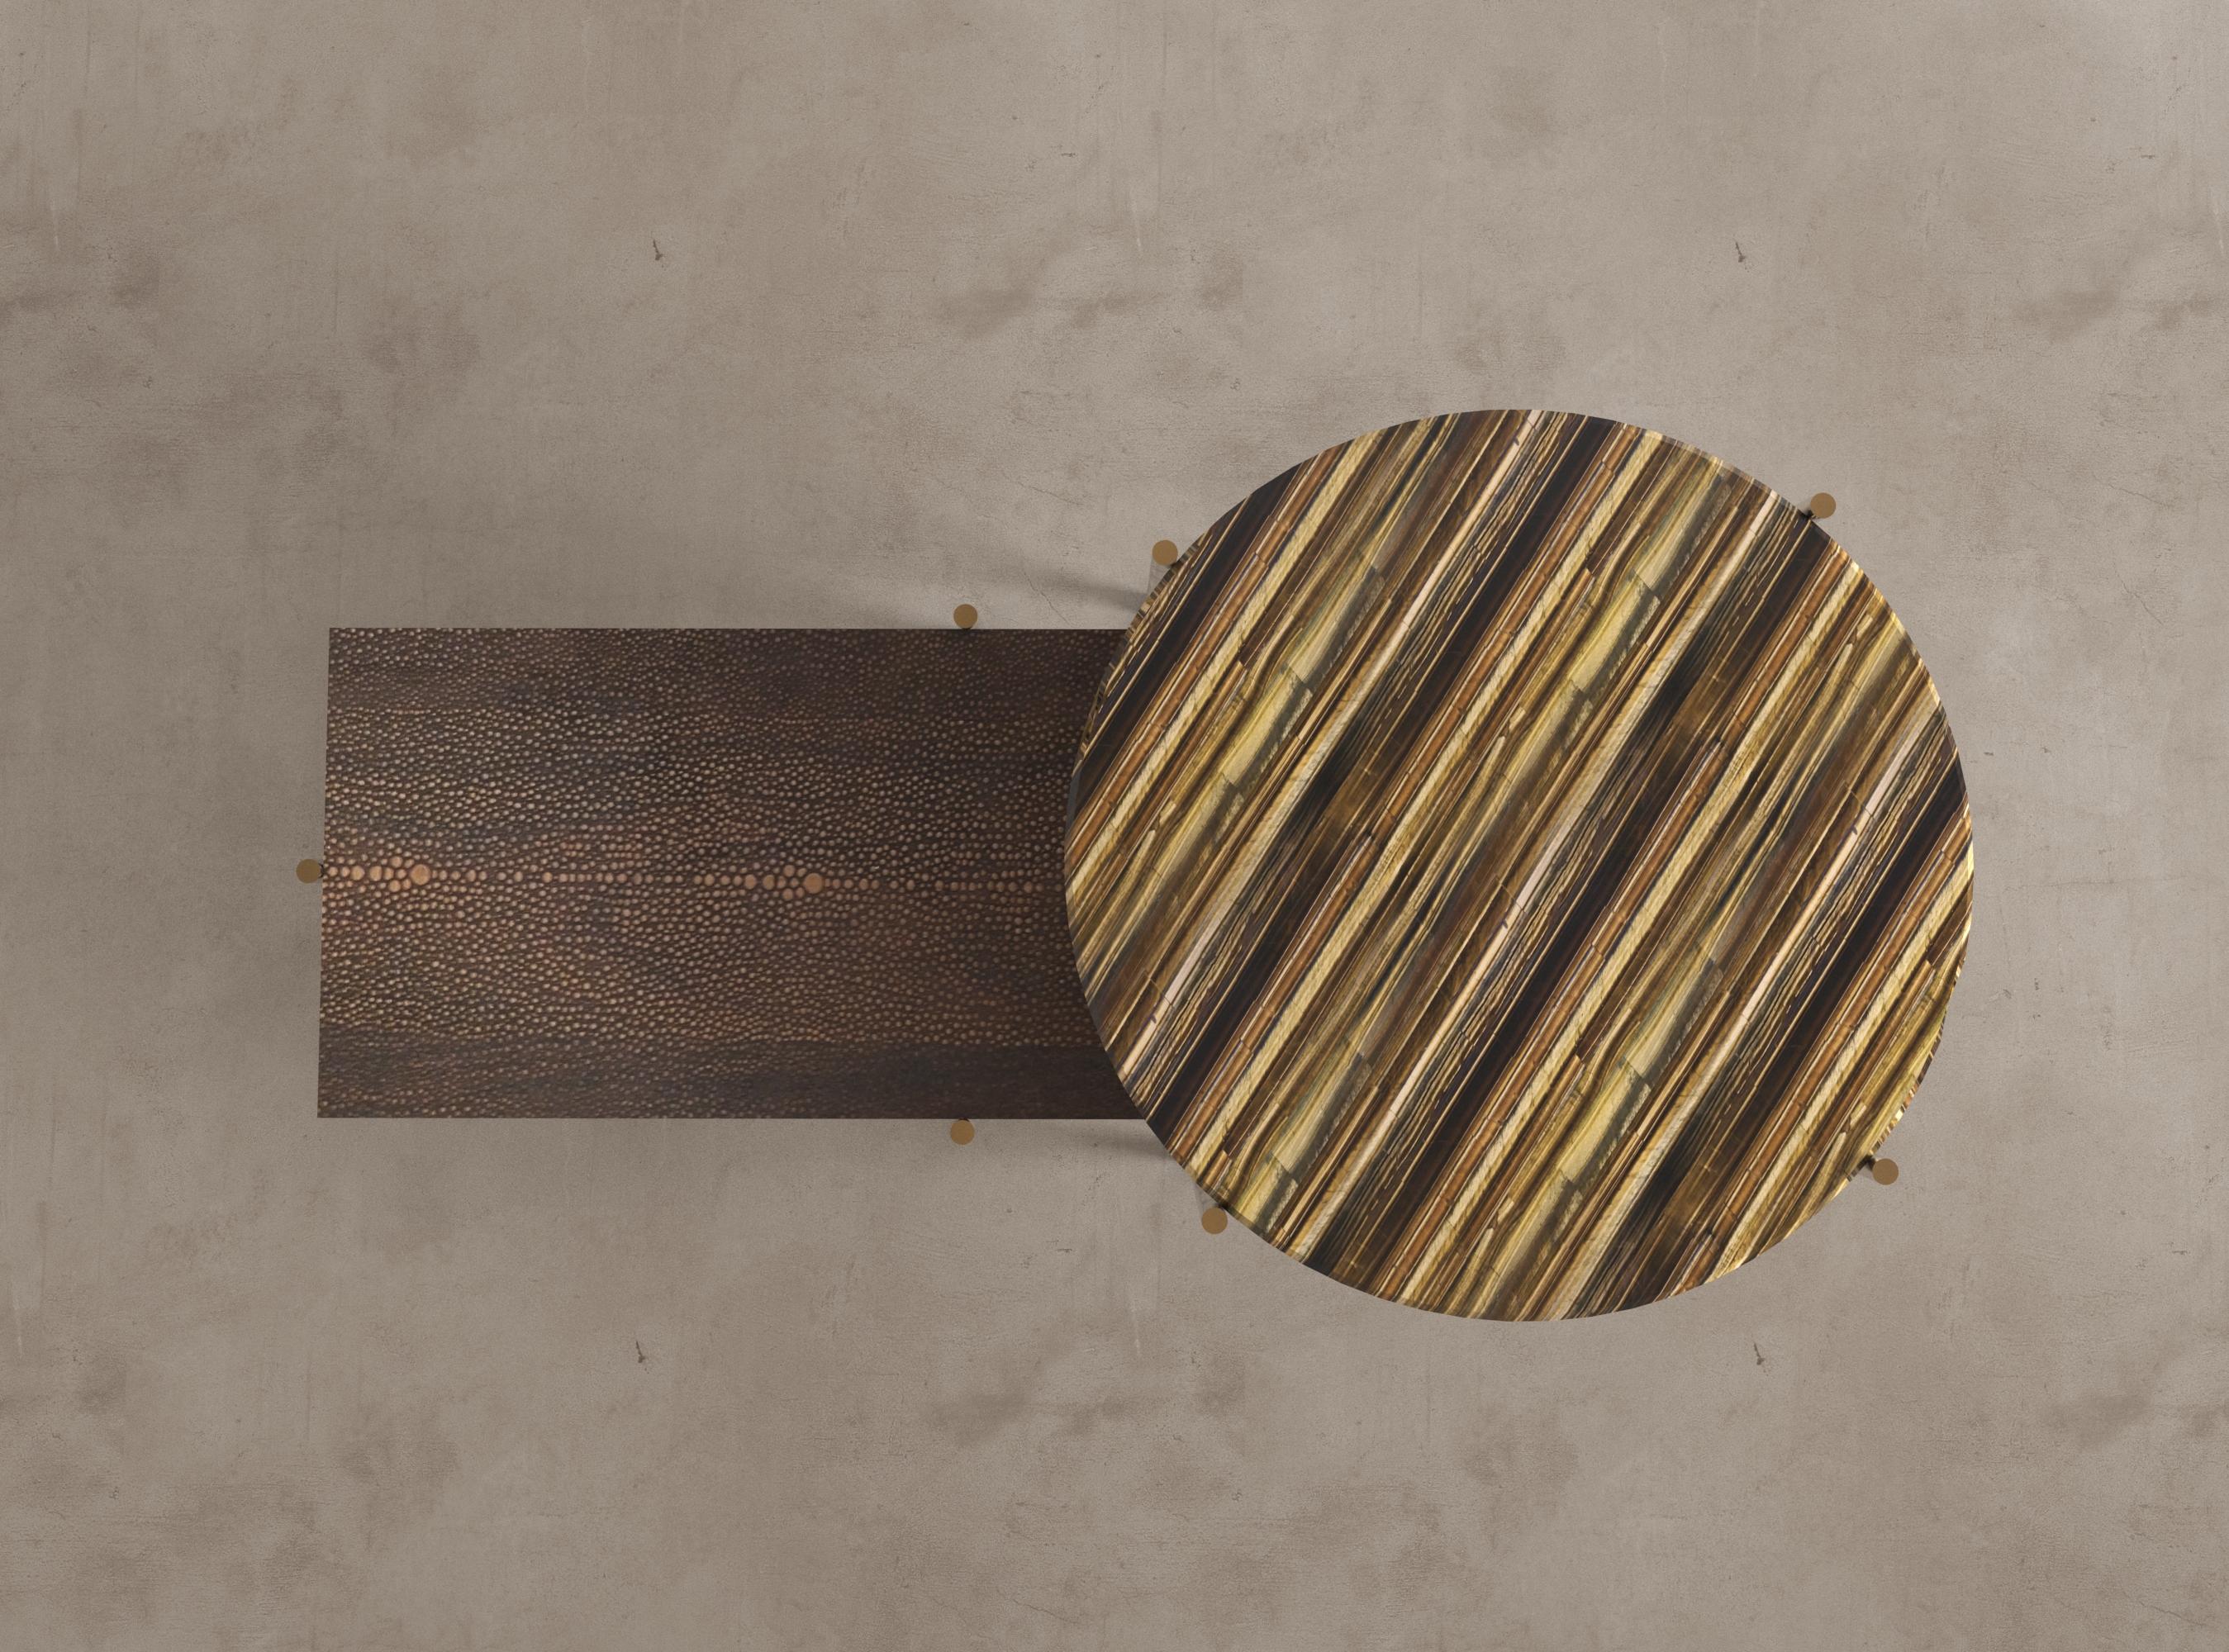 Contemporary Tiger Eye´s Precious Stone and Wood Tom & Tom Table Handsculpted by ELEMENT&CO